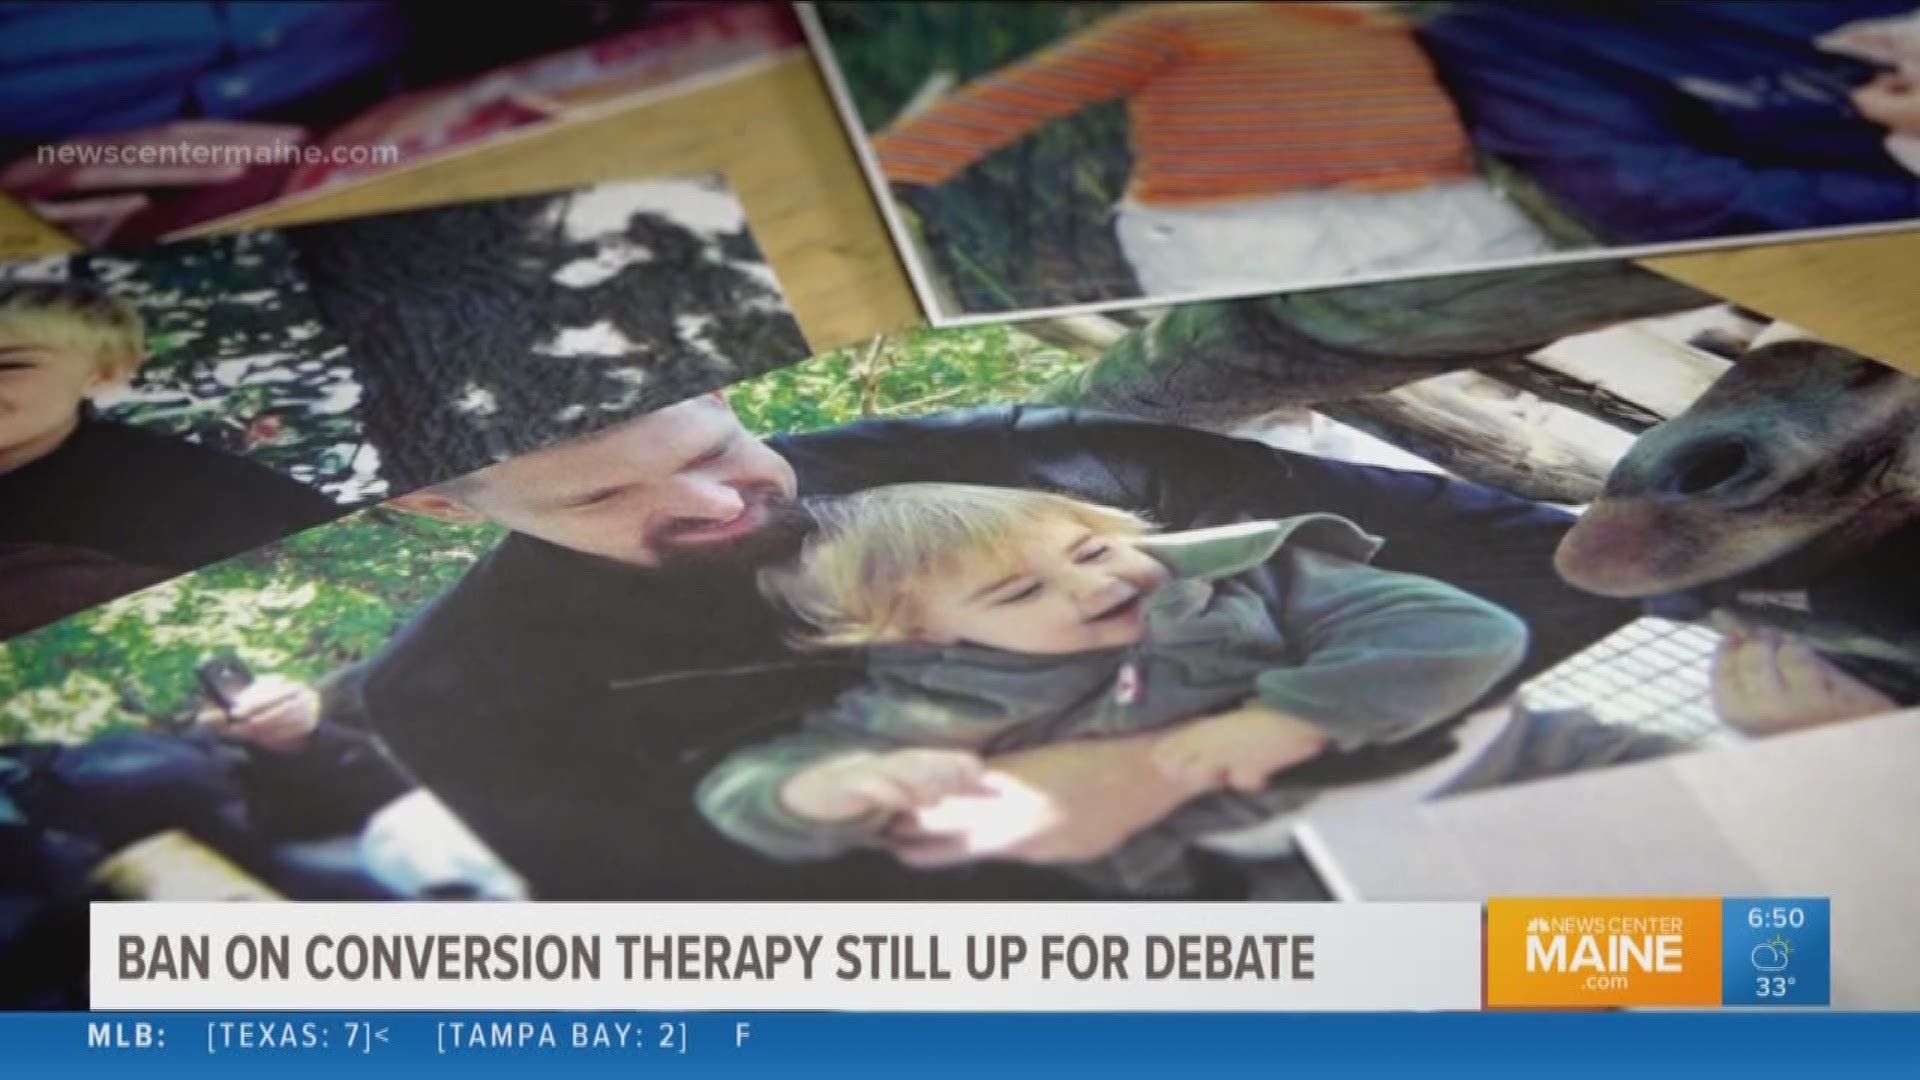 Conversion Therapy ban up for debate